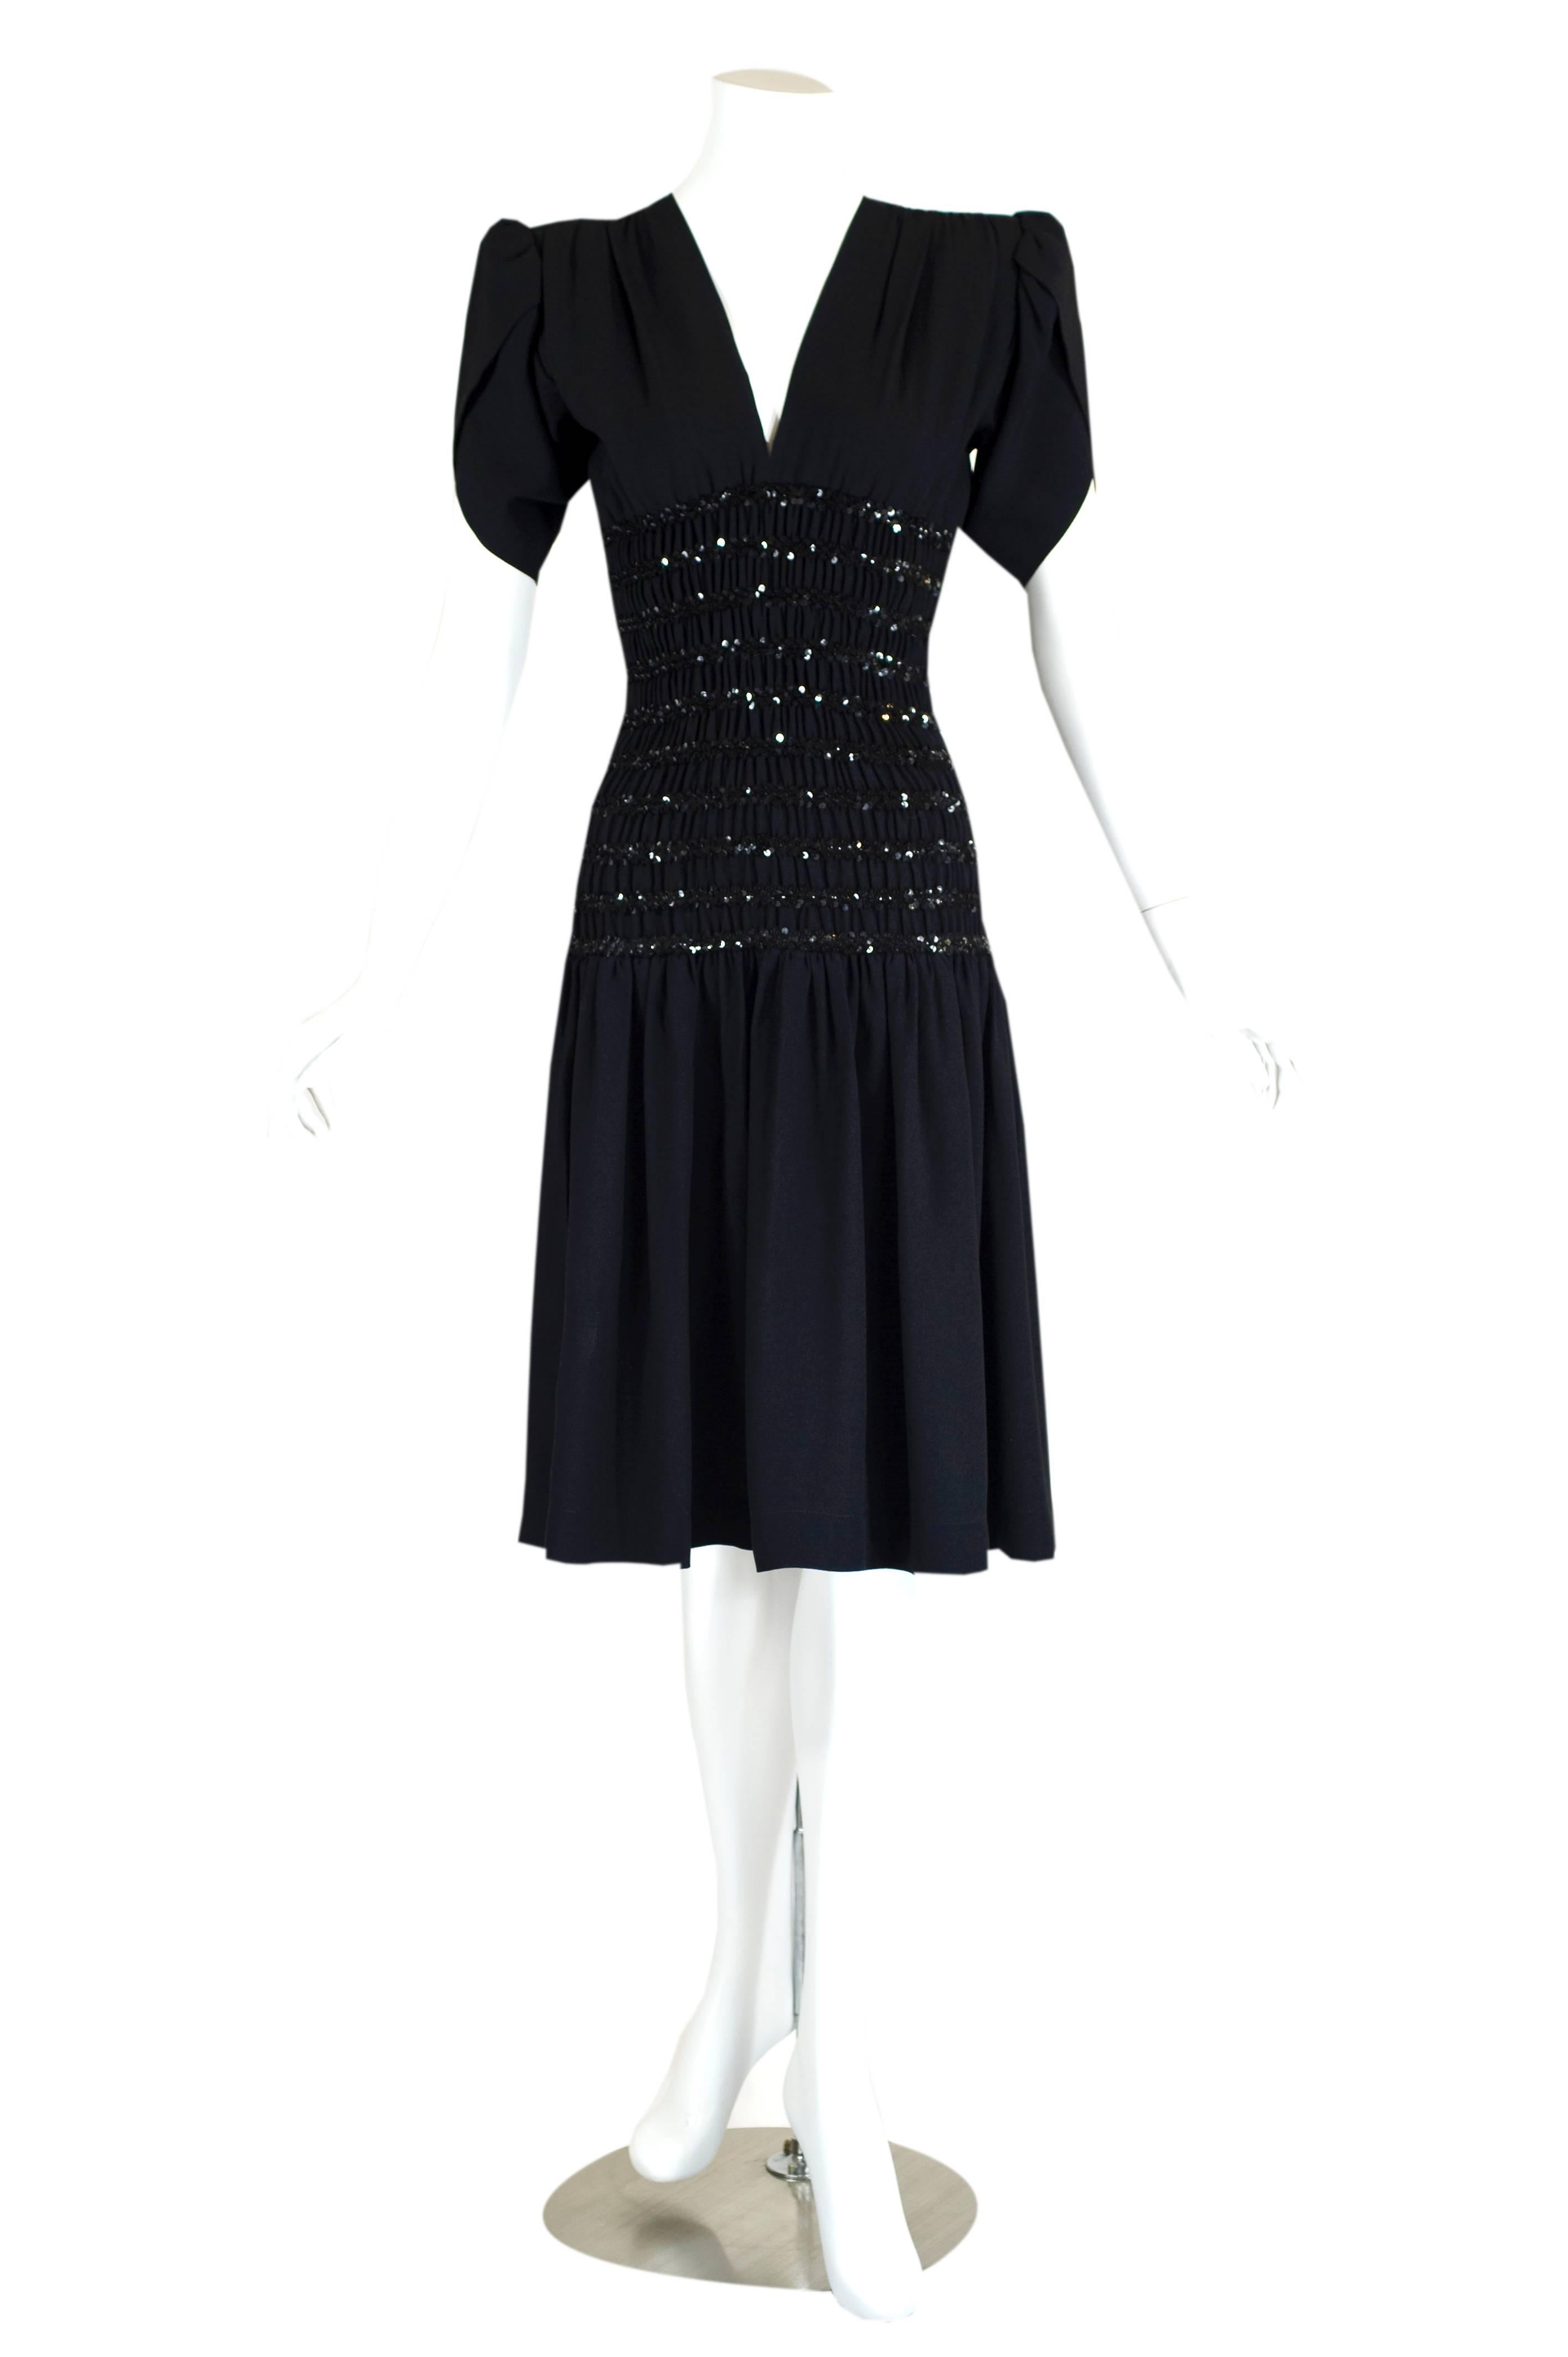 From the Eighties, this crepe de chine cocktail dress by Yves Saint Laurent shows how power shoulders and sequins can look downright stunning in the capable hands of a masterful designer. The padded supports form a gorgeous line at the top of the